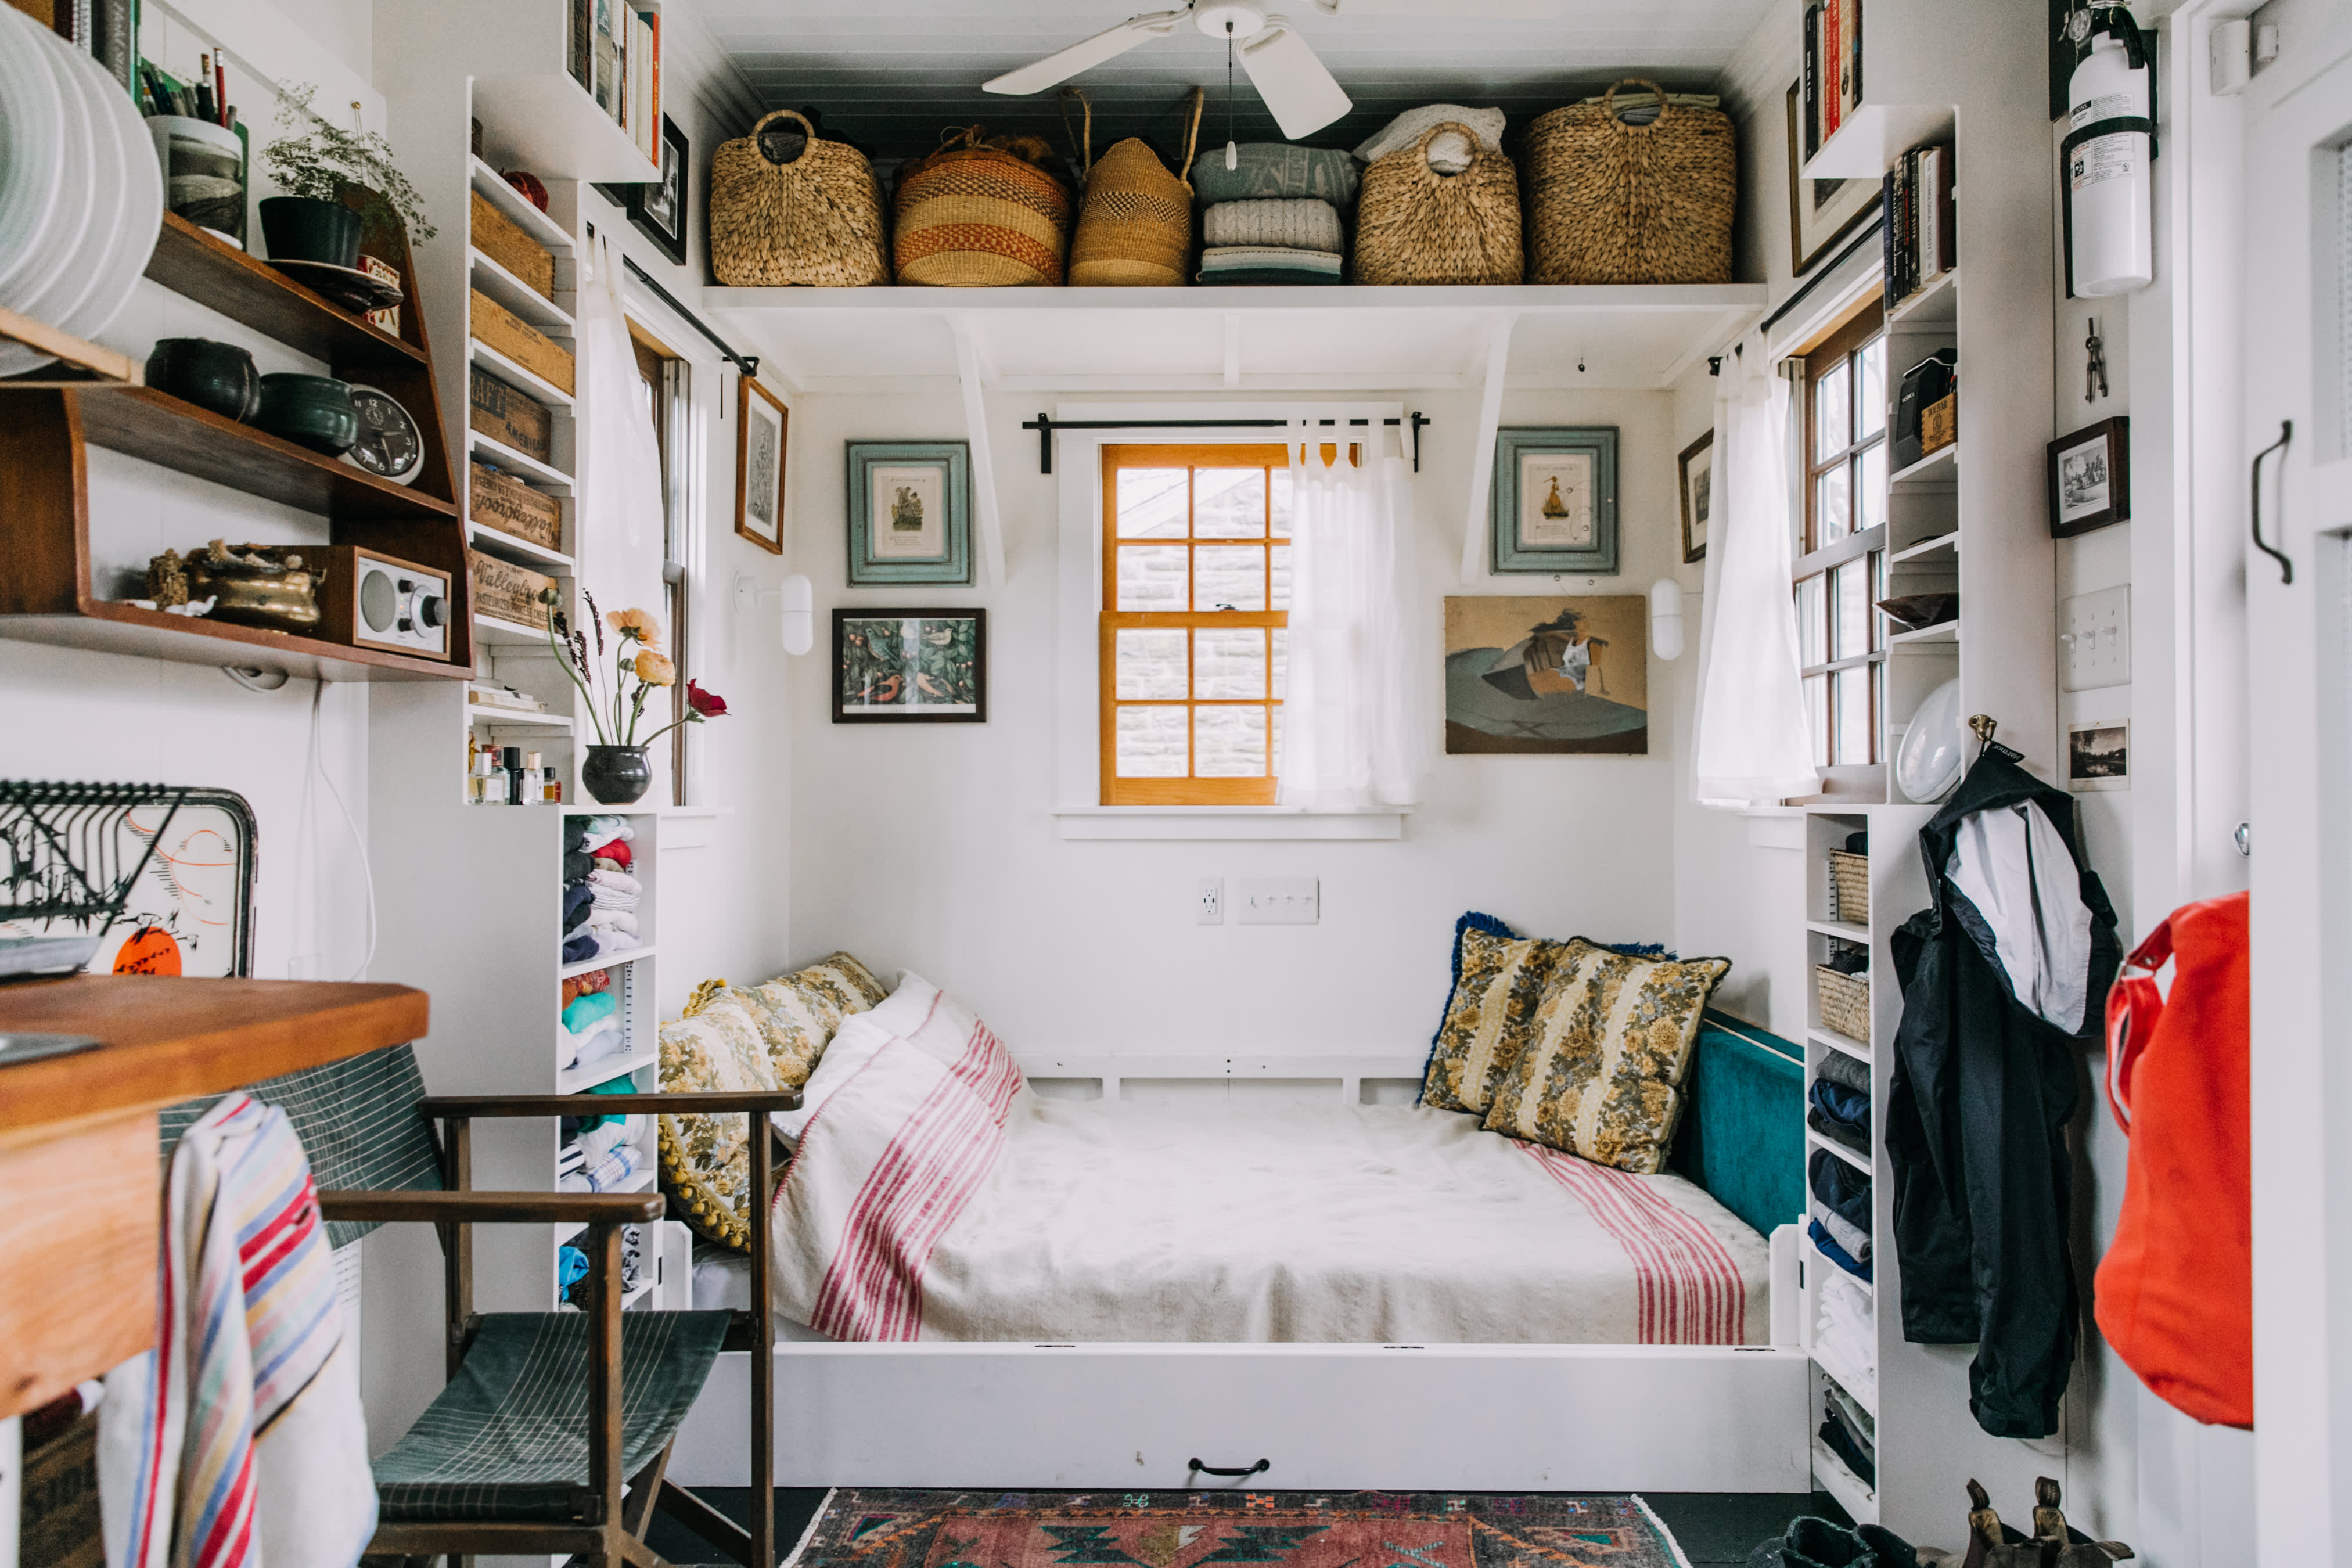 12 small bedroom storage ideas to make your space feel spaci